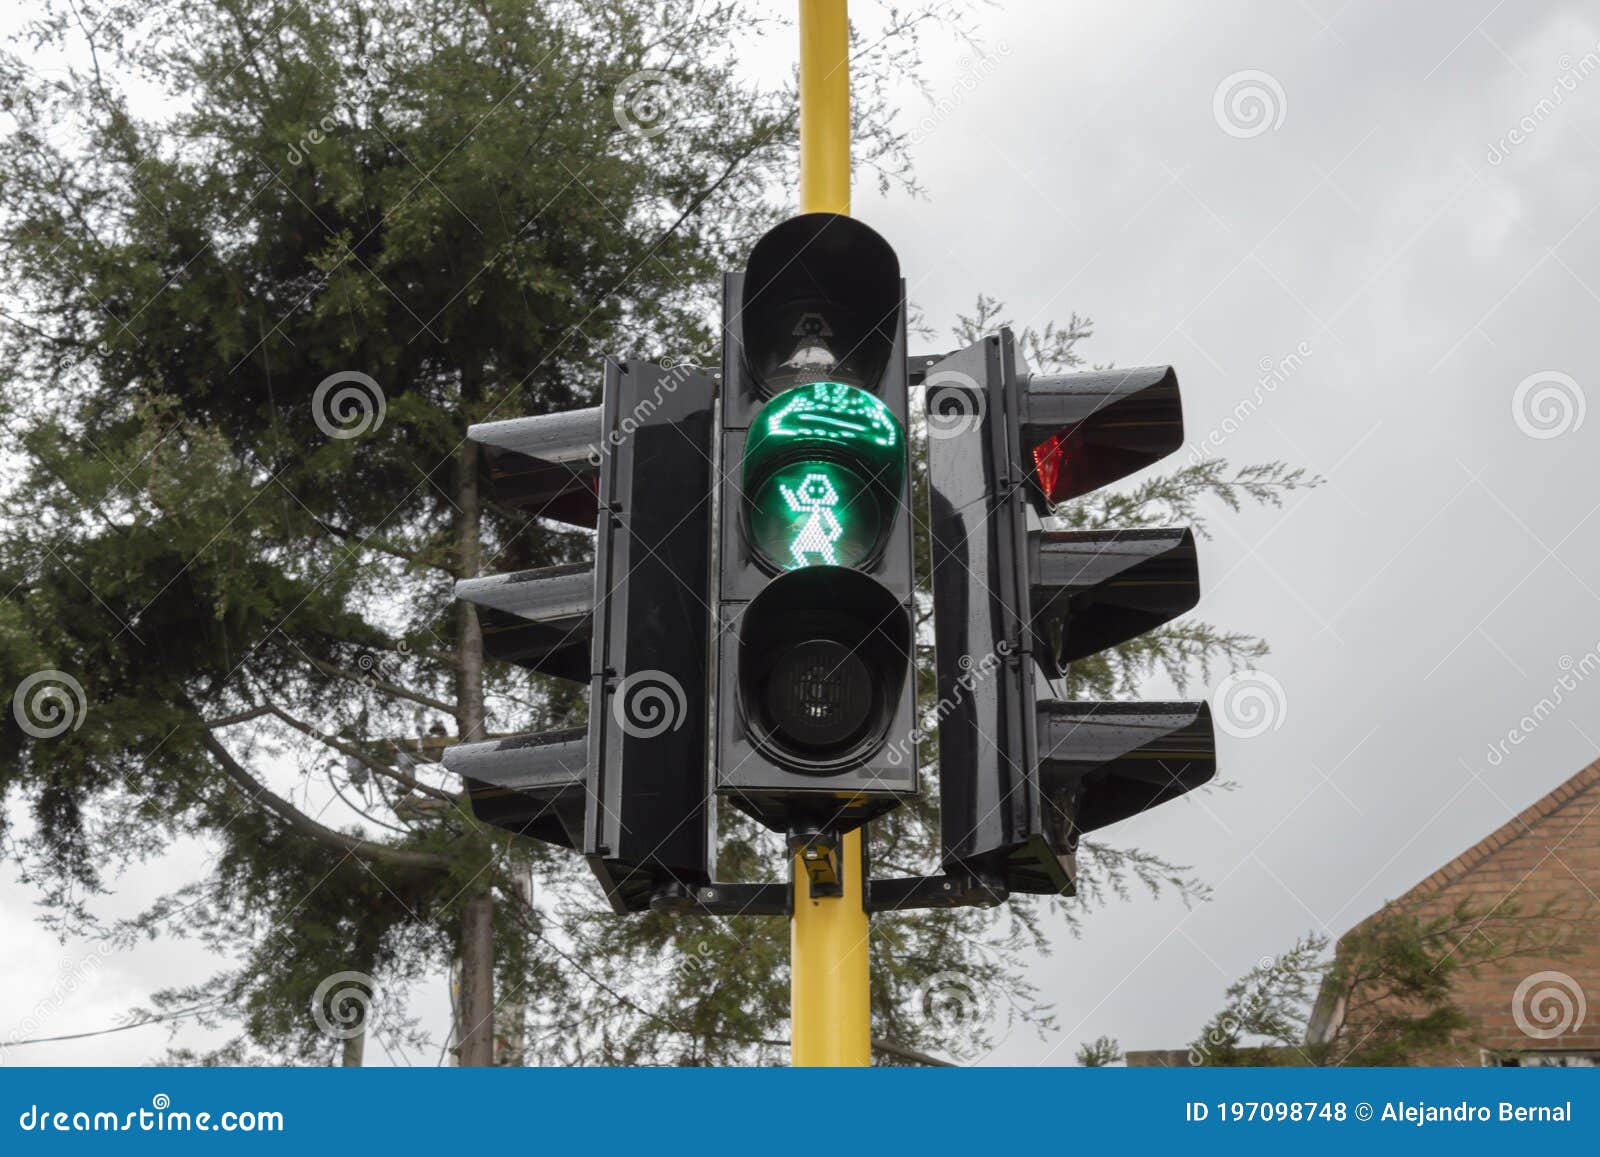 peatonal green traffic light on with a tree and grey cloud